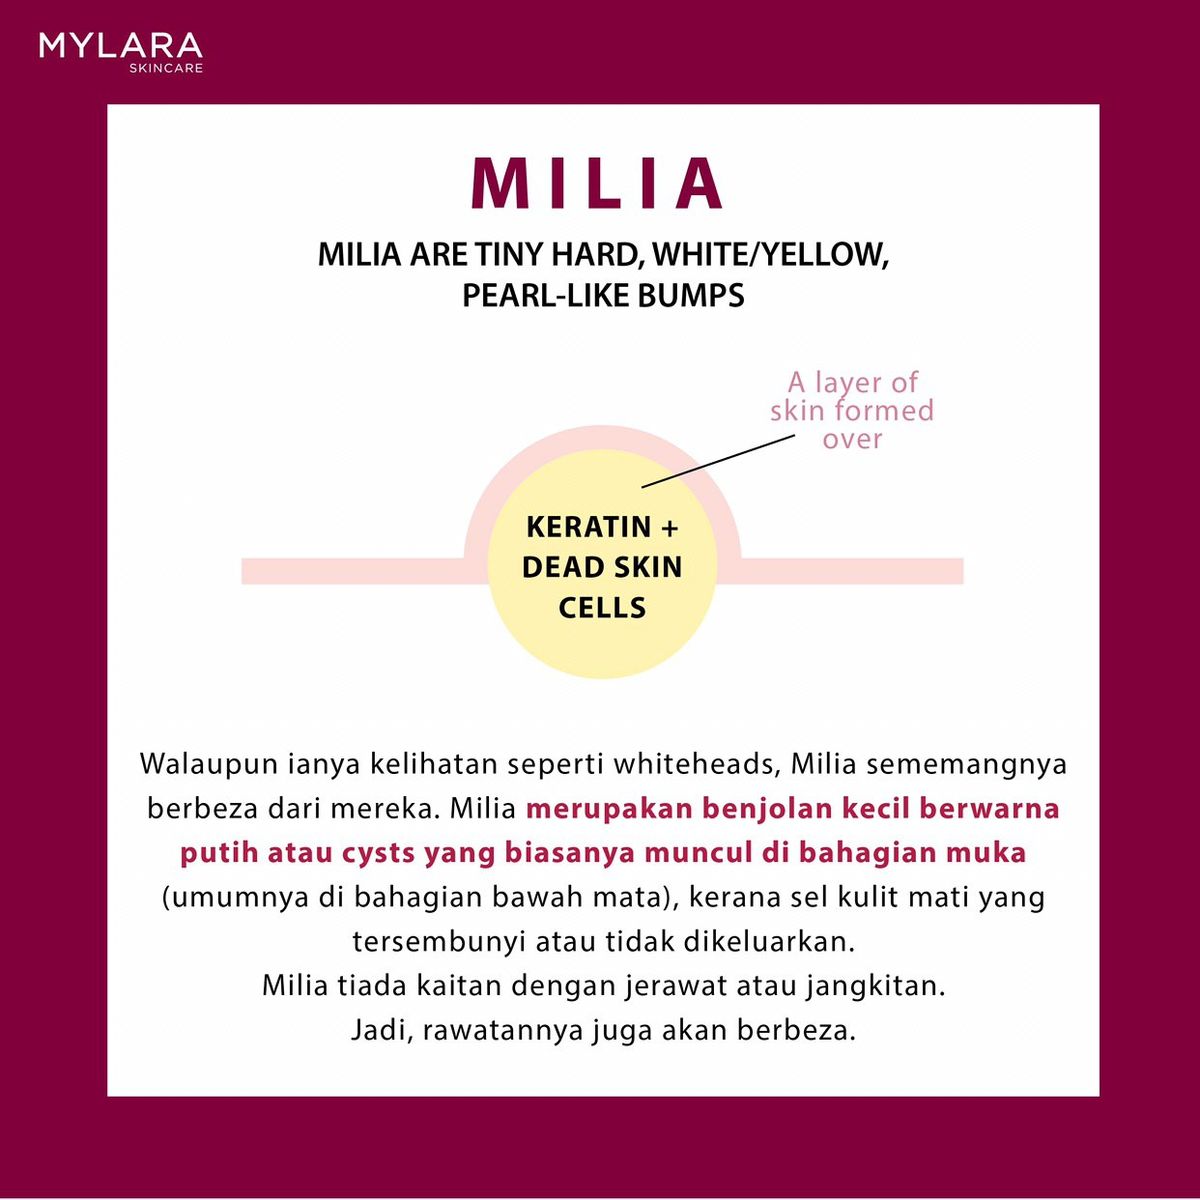 What is MILIA?